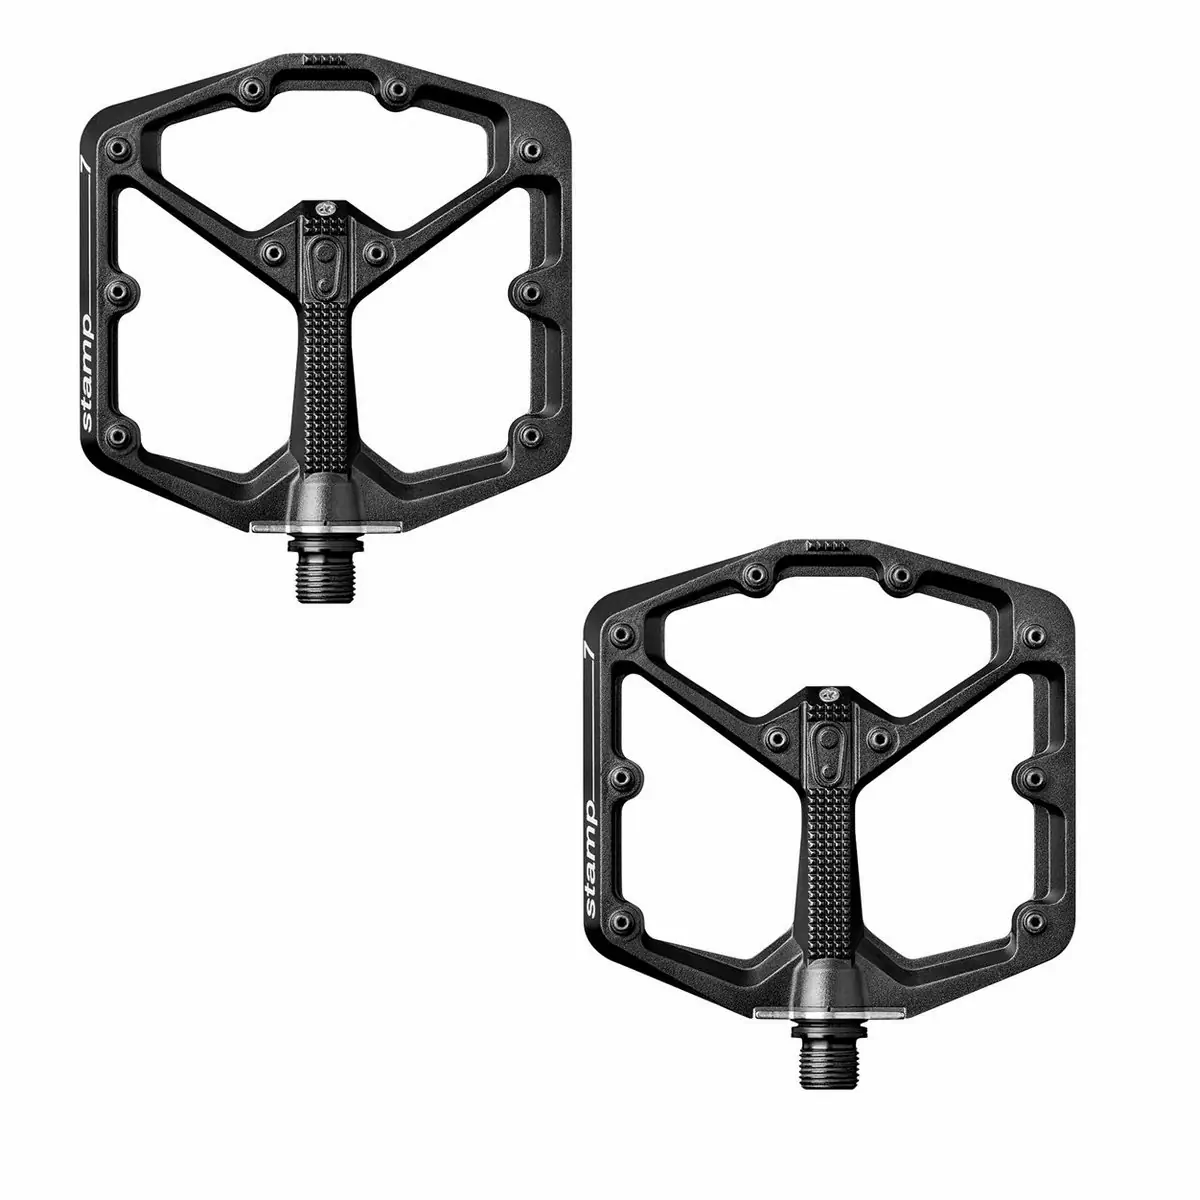 Crank brothers cb16004 pair of pedals stamp 7 small black Pair of ped